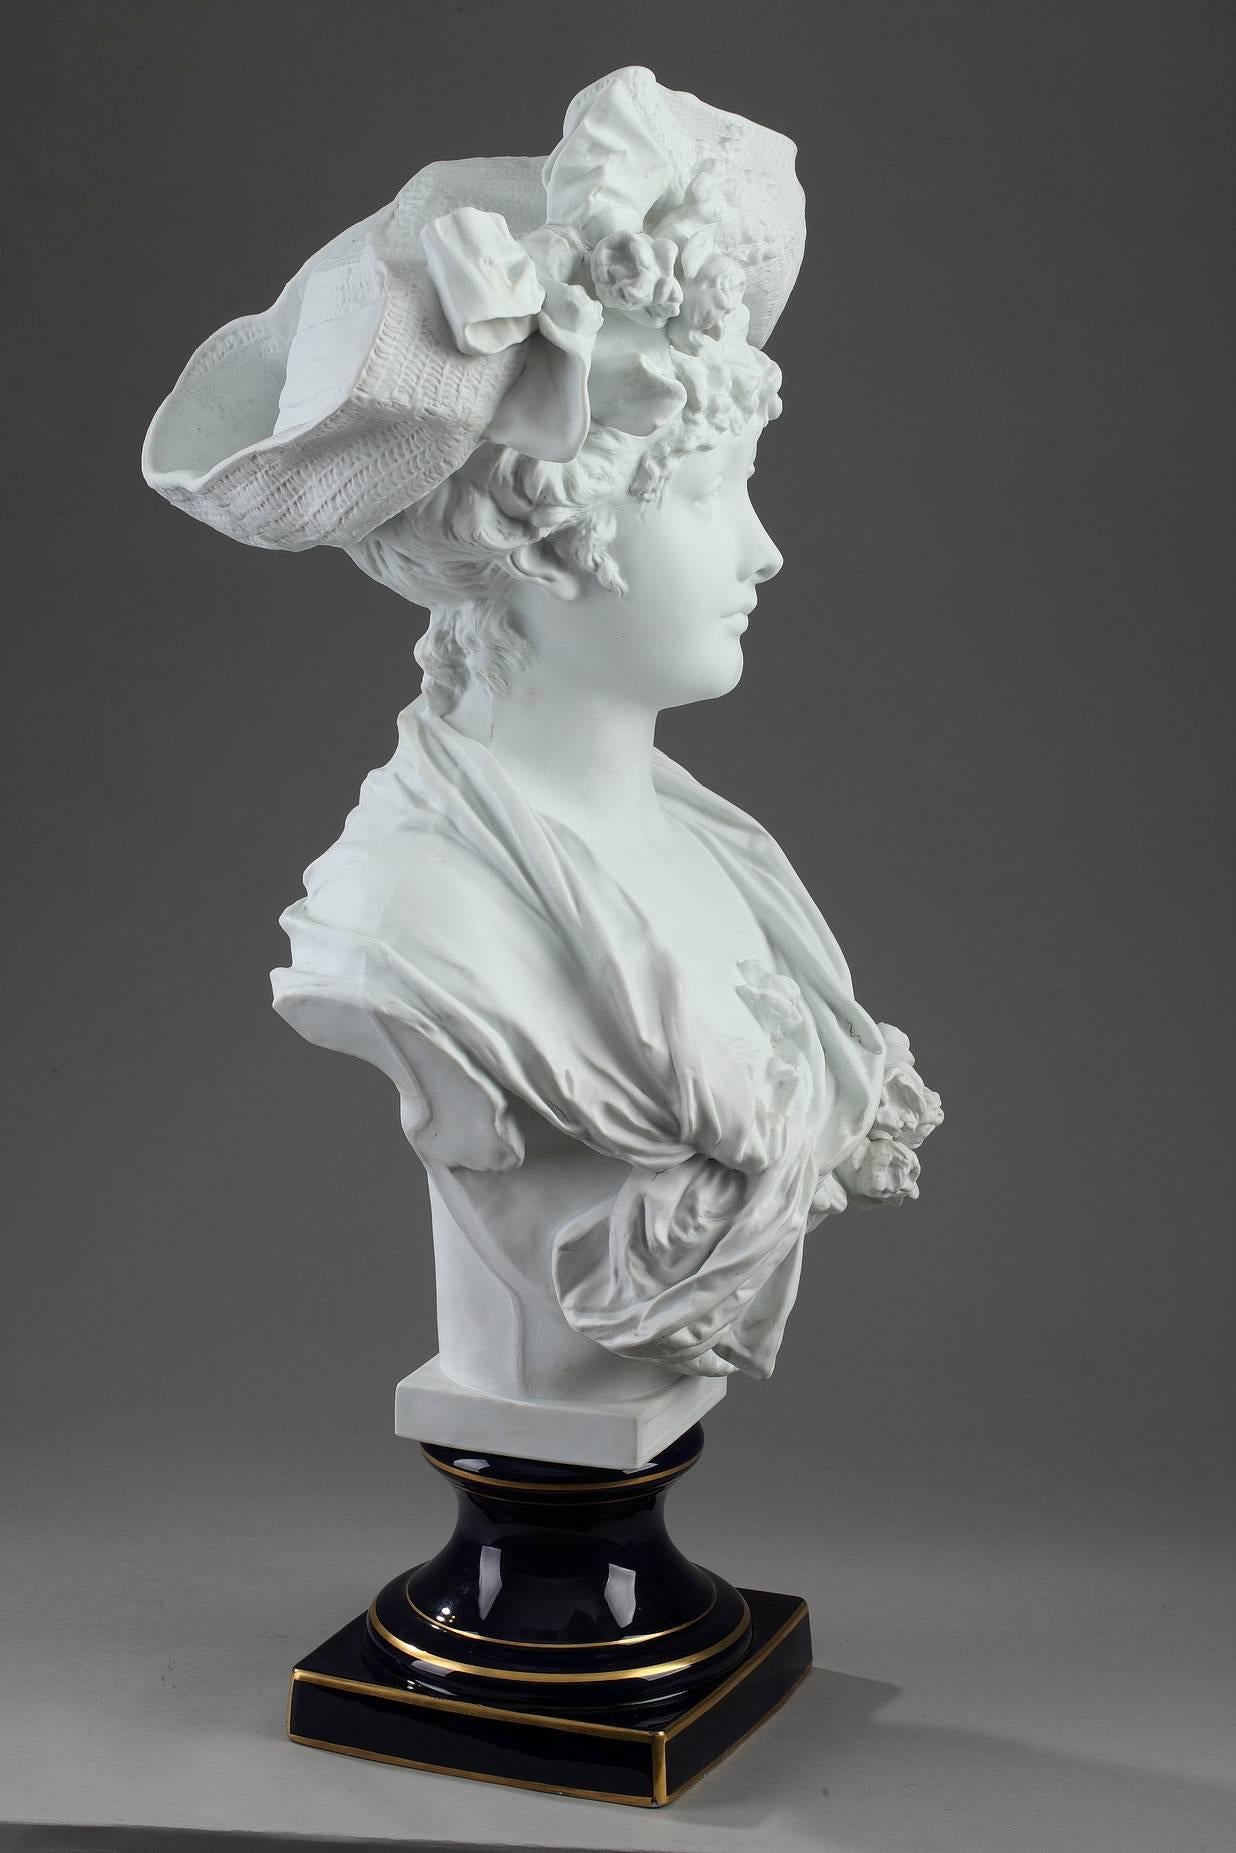 Late 19th century porcelain biscuit bust of a woman after Albert Ernest Carrier-Belleuse (1824-1887) and produced by the Laporte factory in Limoges. She is wearing an elegant dress accented with roses and a hat embellished with bouquets of flowers